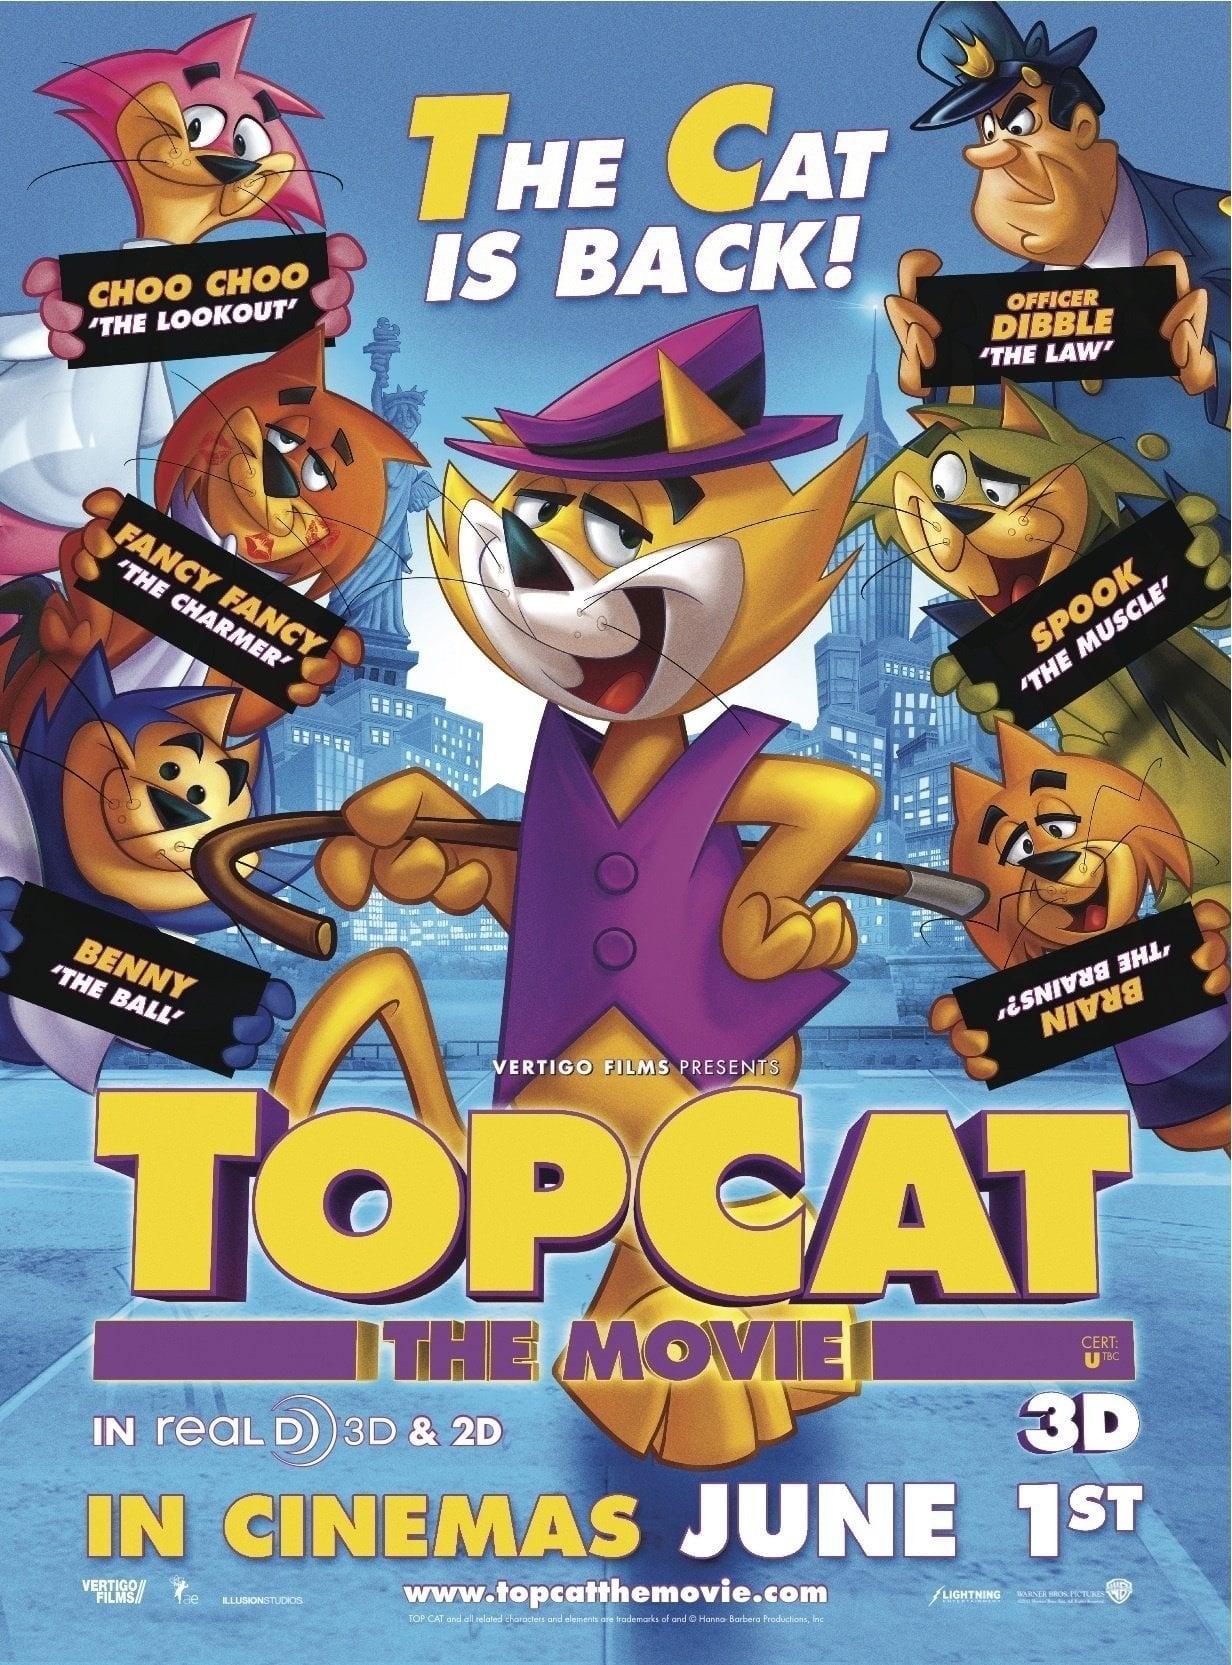 Top Cat: The Movie poster